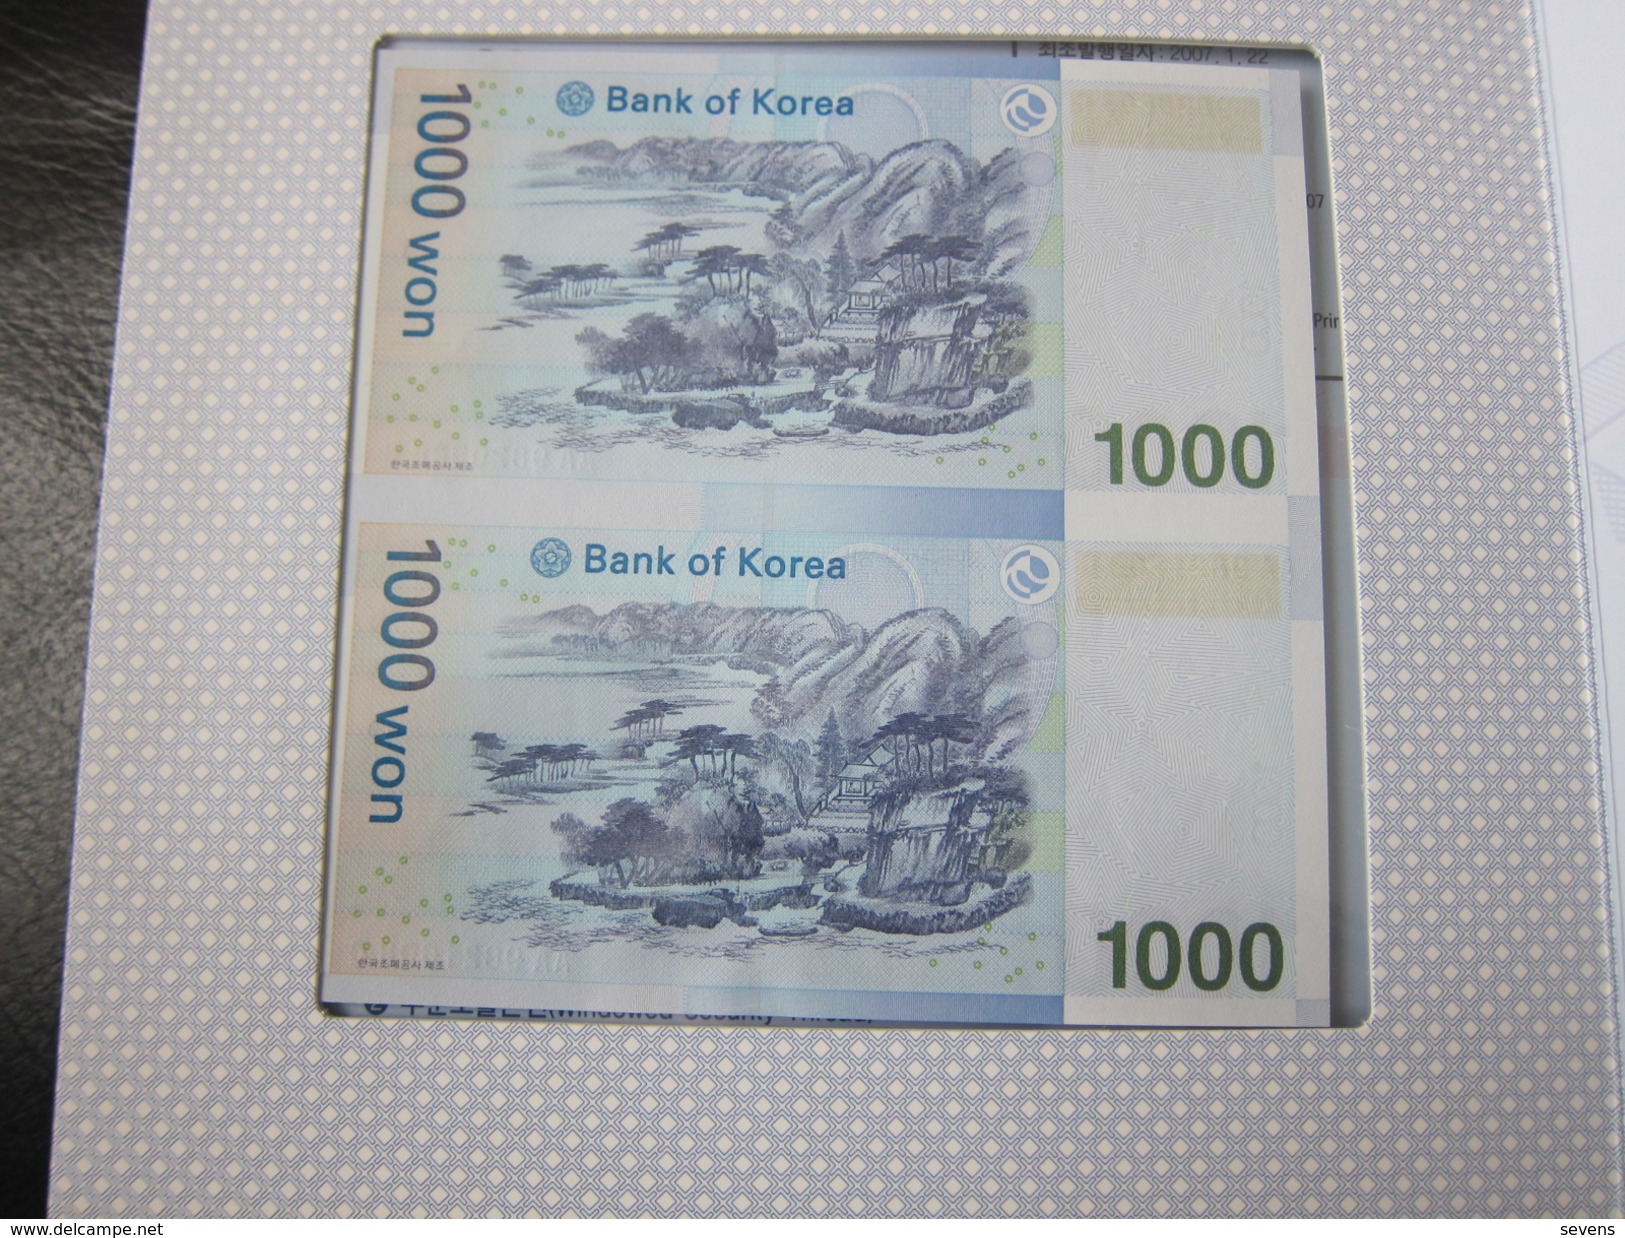 1000 Won Banknote, Uncut Sheet With Two Banknotes,in Folder - Korea, South